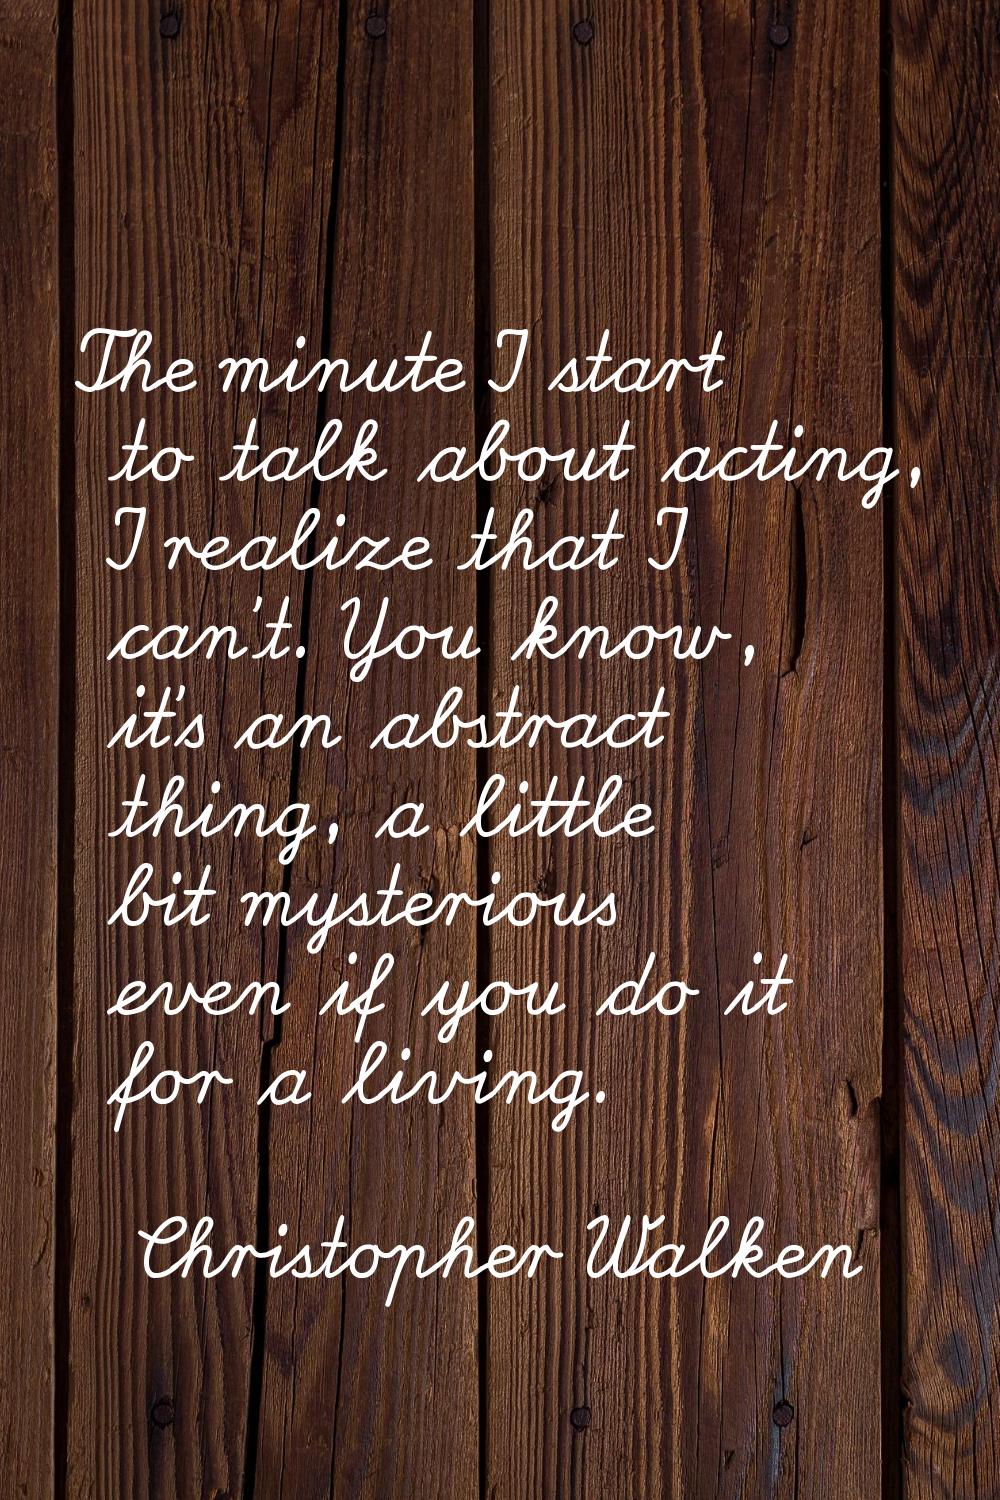 The minute I start to talk about acting, I realize that I can't. You know, it's an abstract thing, 